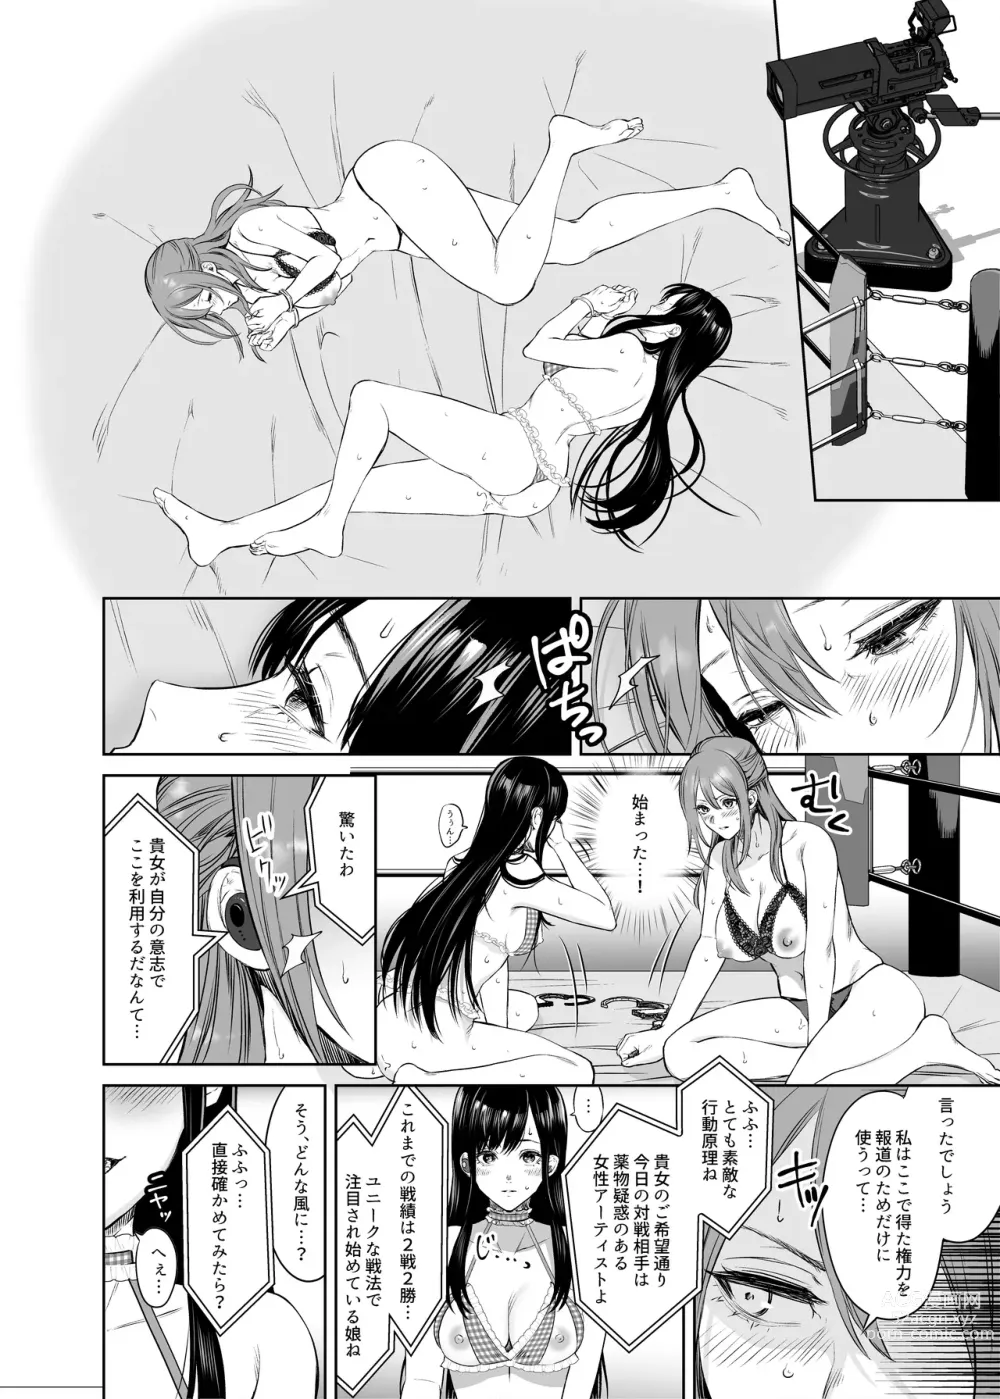 Page 8 of doujinshi LesFes Co Candid Reporting Vol. 004